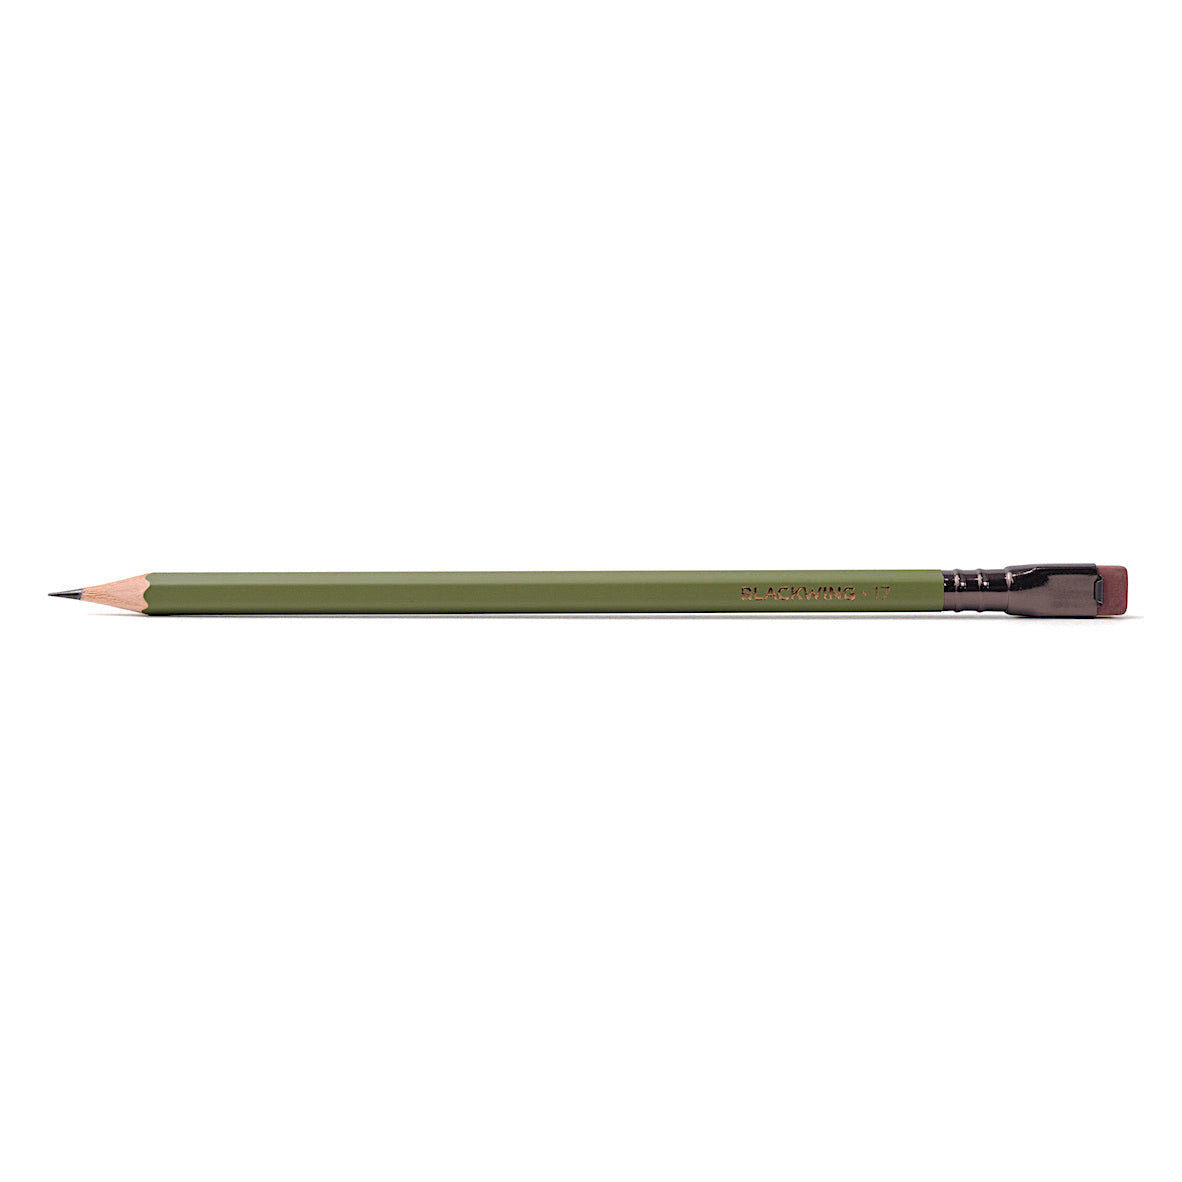 Bleistift Blackwing Volume 17 | 12 Stück | Limited Edition | Made in Japan